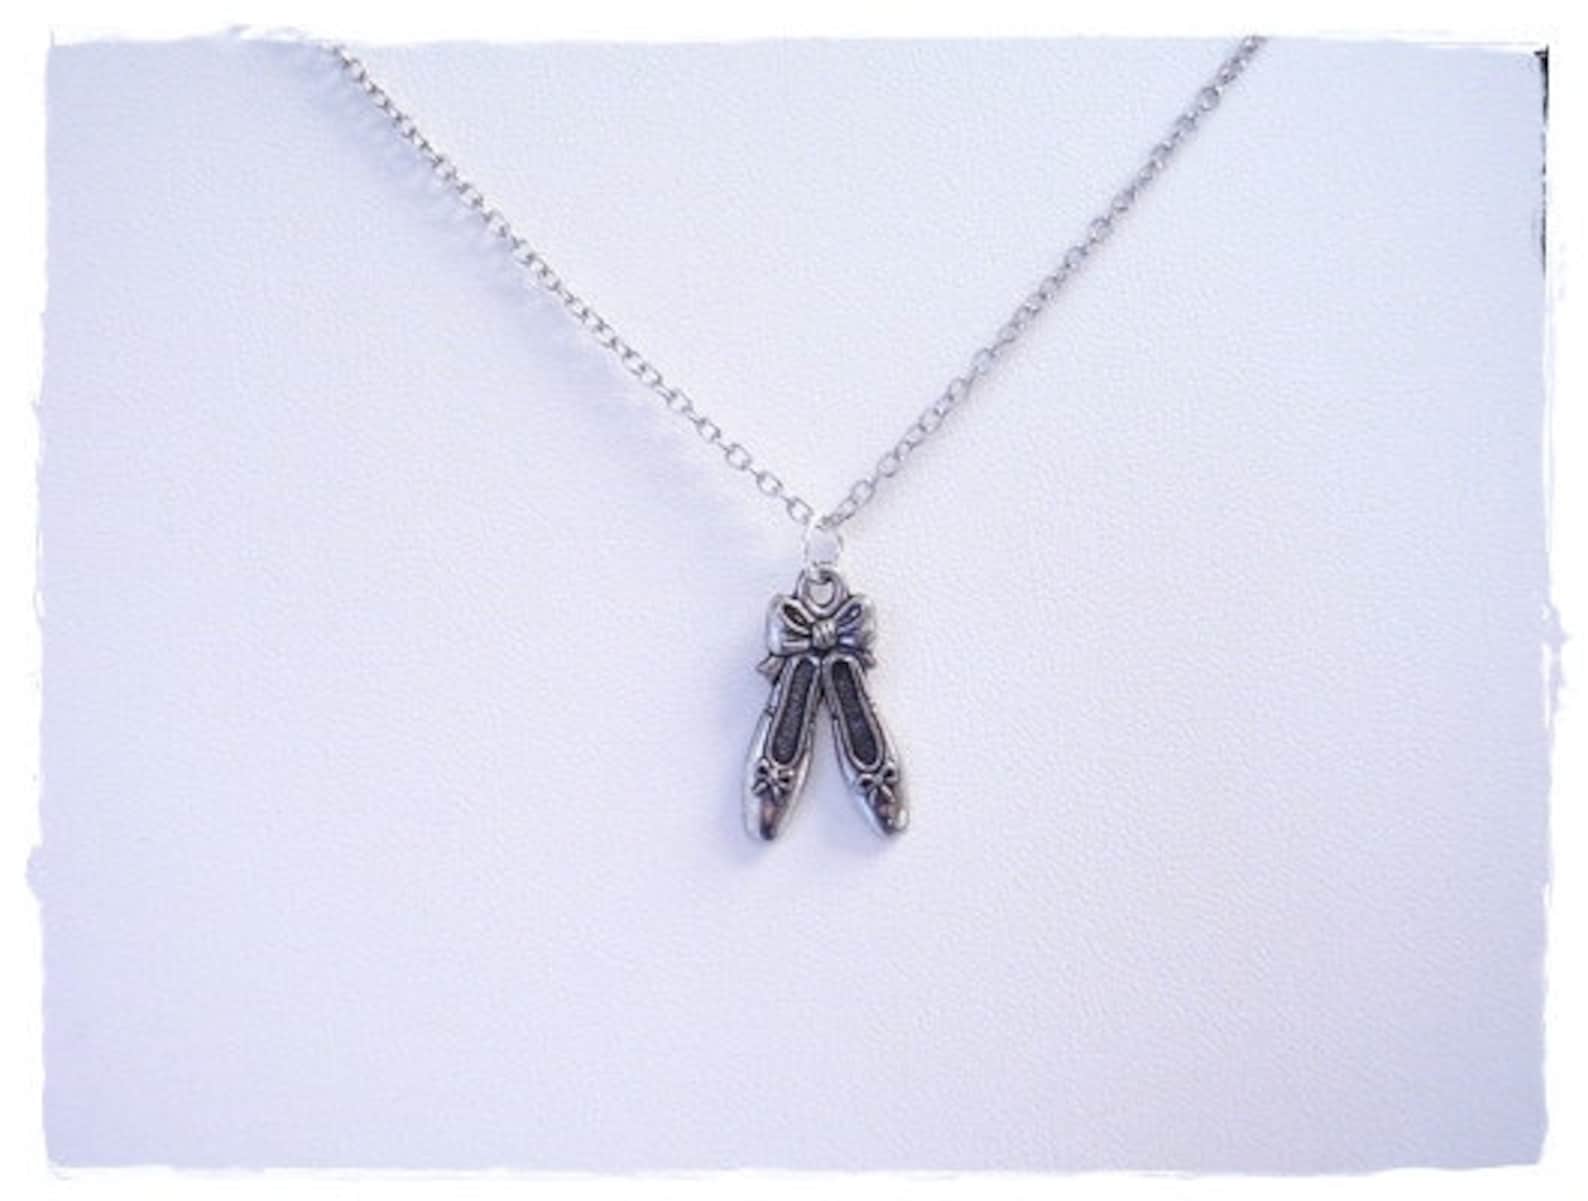 silver ballet slippers necklace - antique pewter ballet slippers charm on a delicate silver plated cable chain or charm only